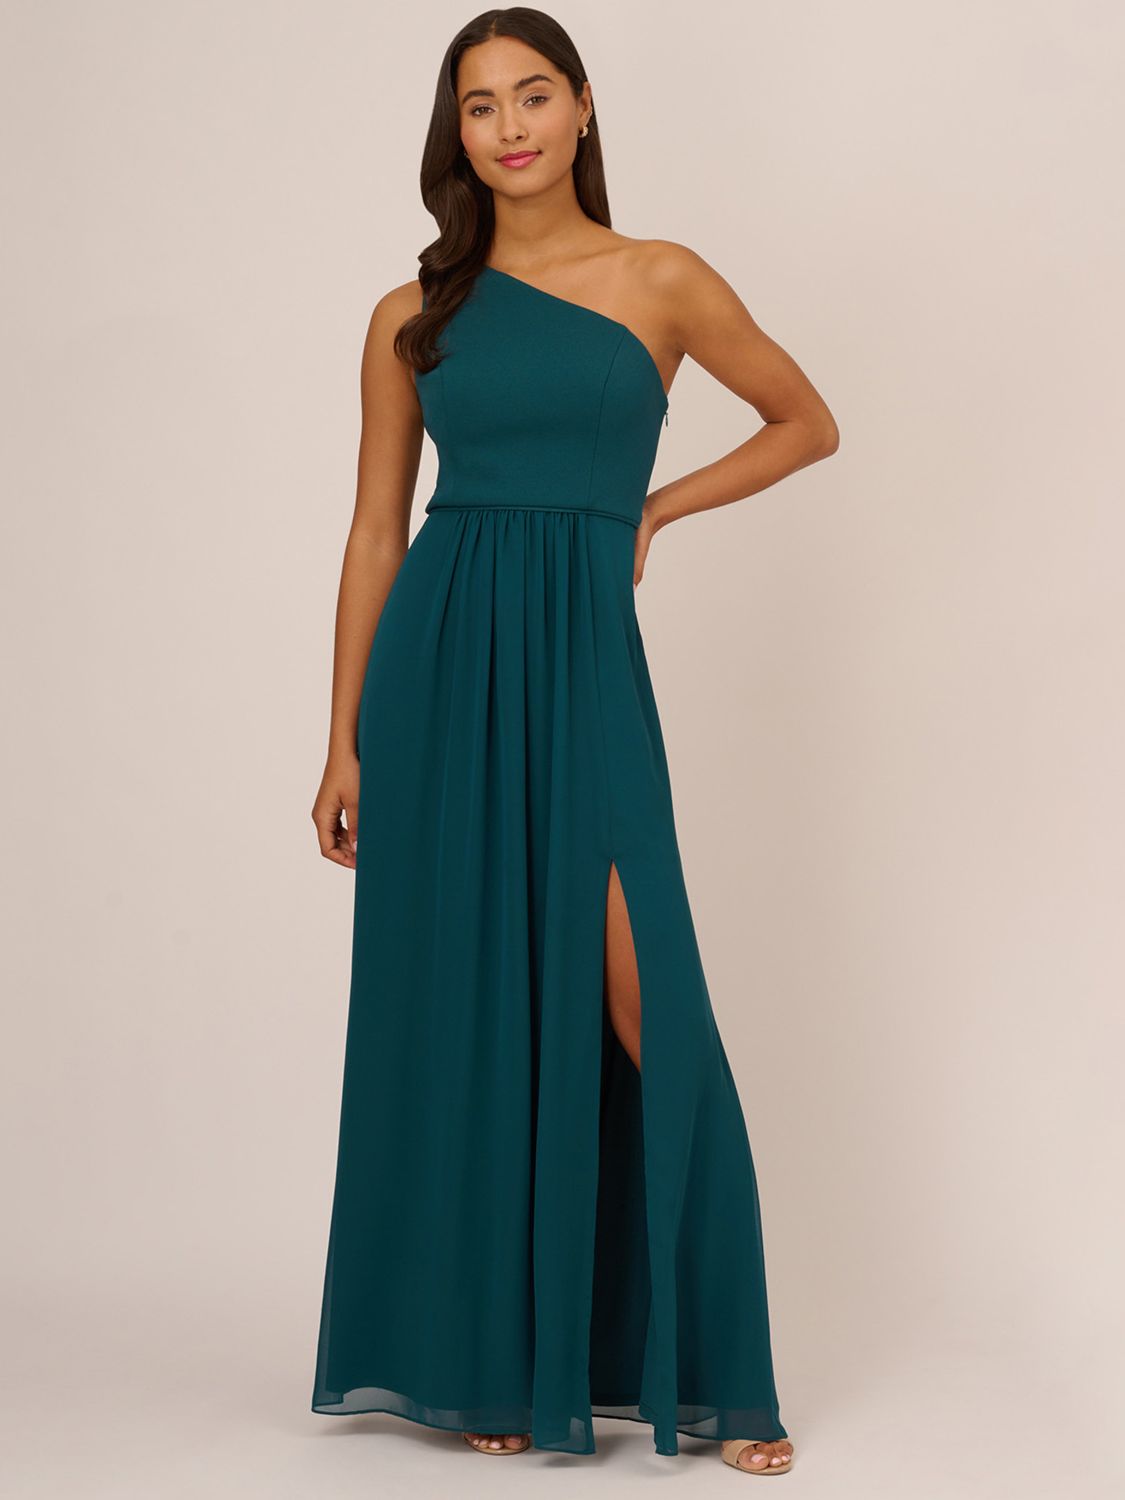 Adrianna Papell One Shoulder Chiffon Gown, Hunter at John Lewis & Partners